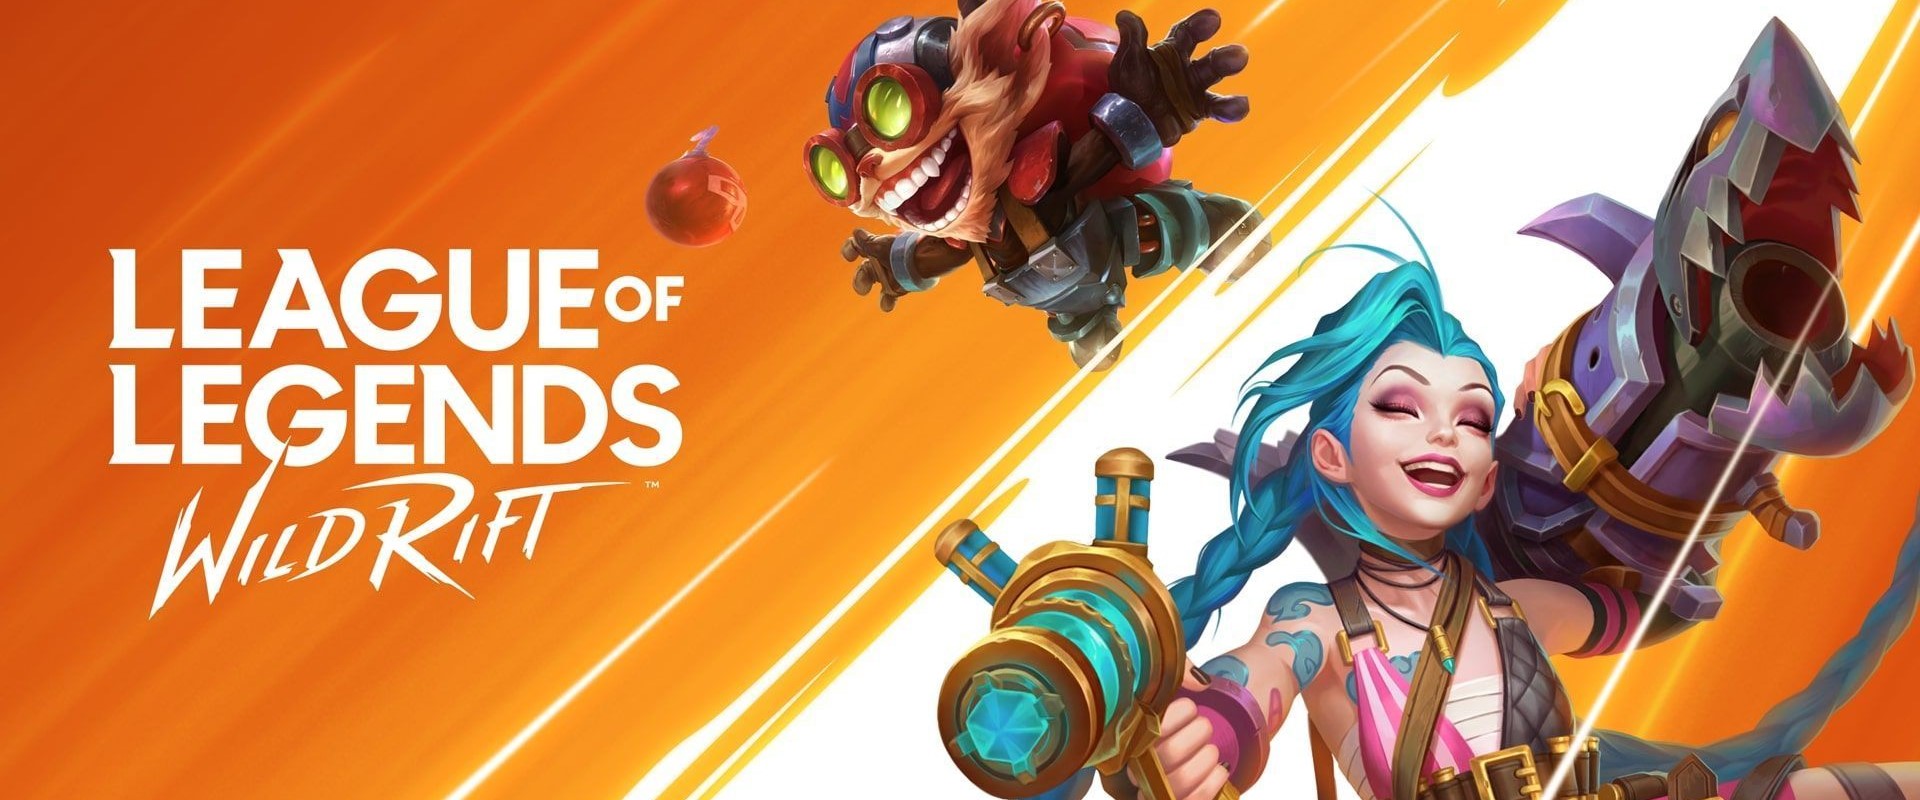 RIOT GAMES LEAGUE OF LEGENDS: WILD RIFT ANNIVERSARY - We Are Social USA